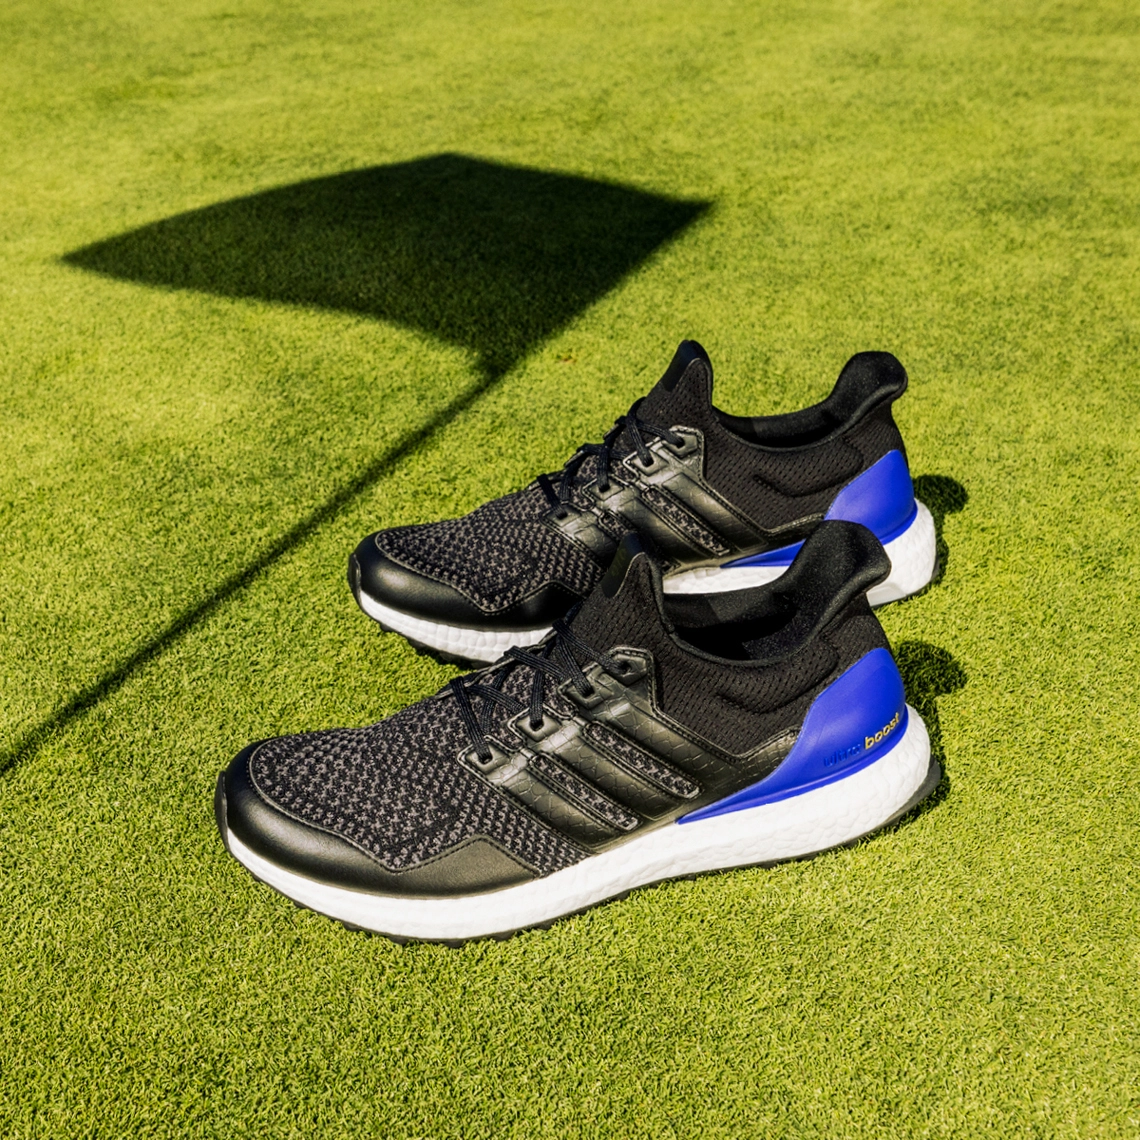 Adidas Unveils the UltraBOOST Golf Shoe Set to Release on April 21st for Golf Enthusiasts